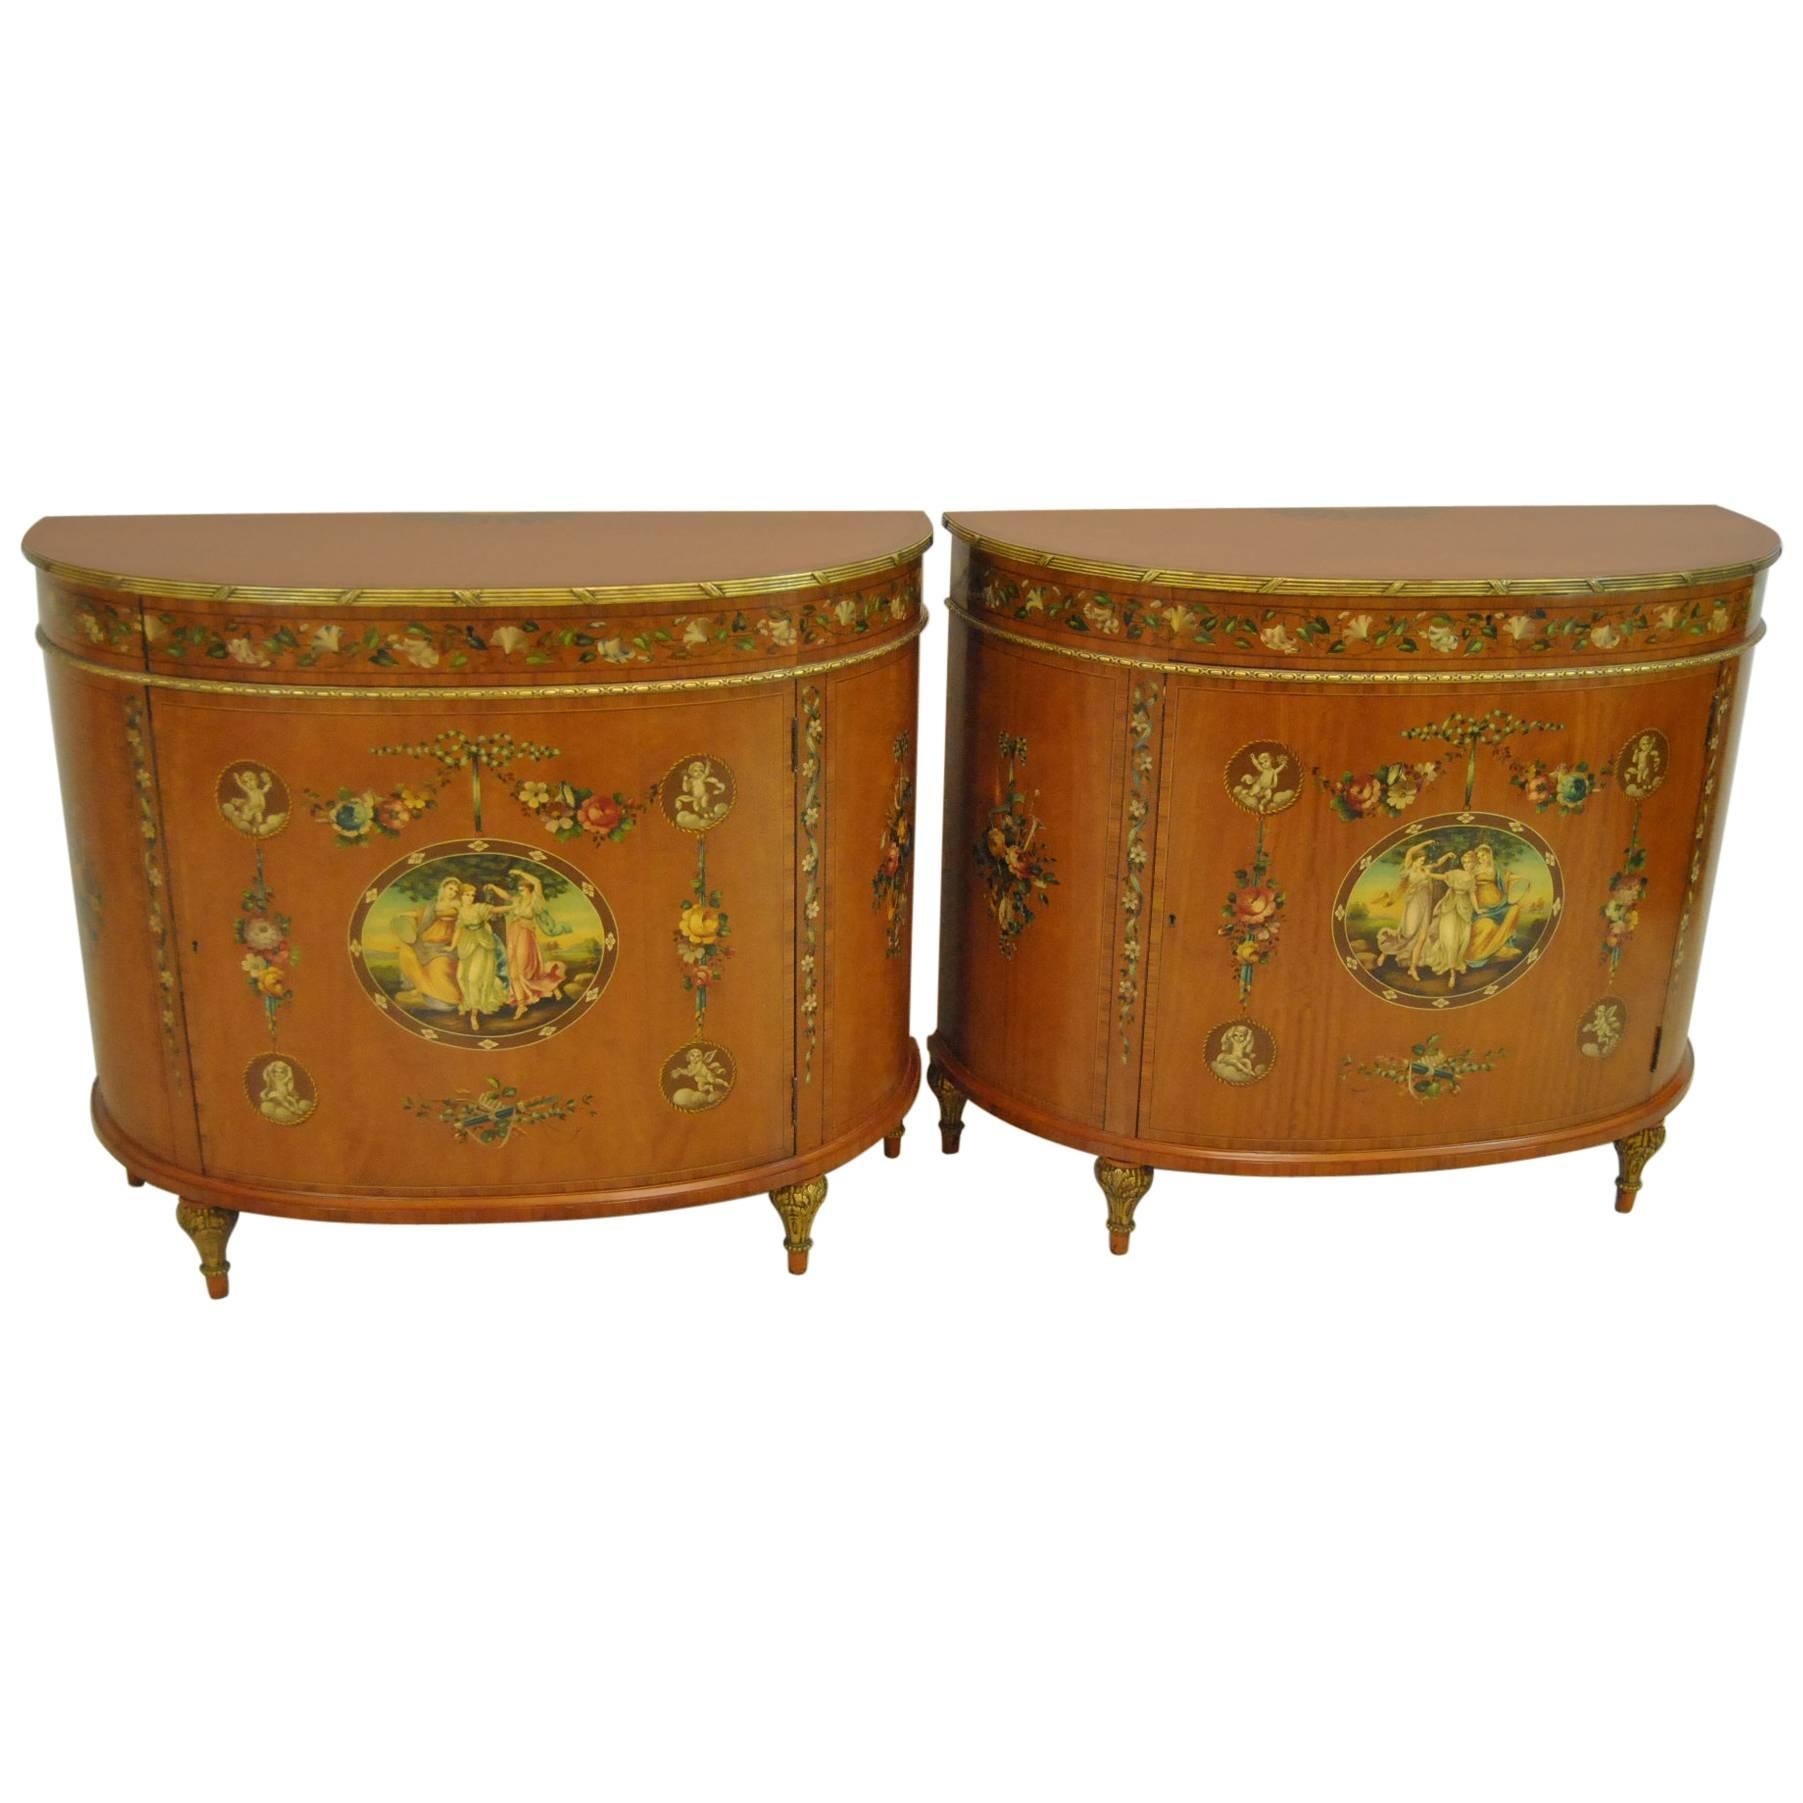 Pair of French Adam Style Commodes by Irwin Furniture Dated 1937 For Sale